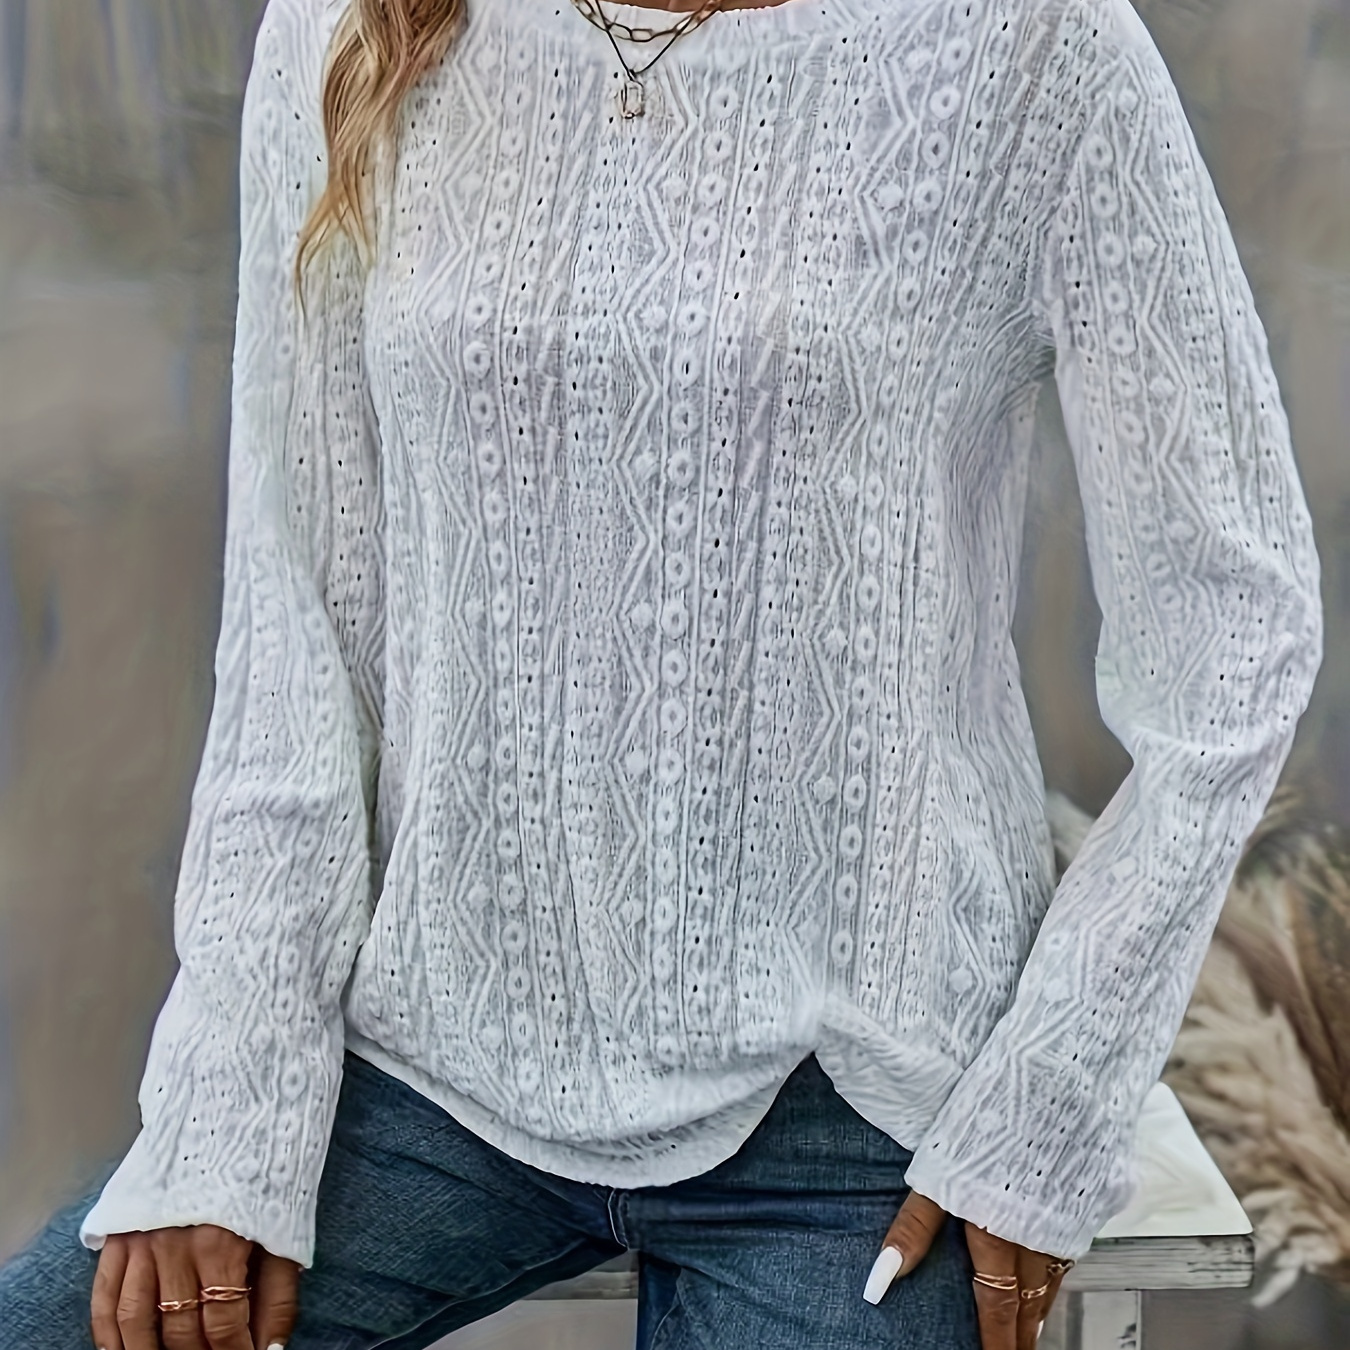 

Solid Textured Eyelet Top, Vintage Long Sleeve Knot Front Crew Neck Top, Women's Clothing